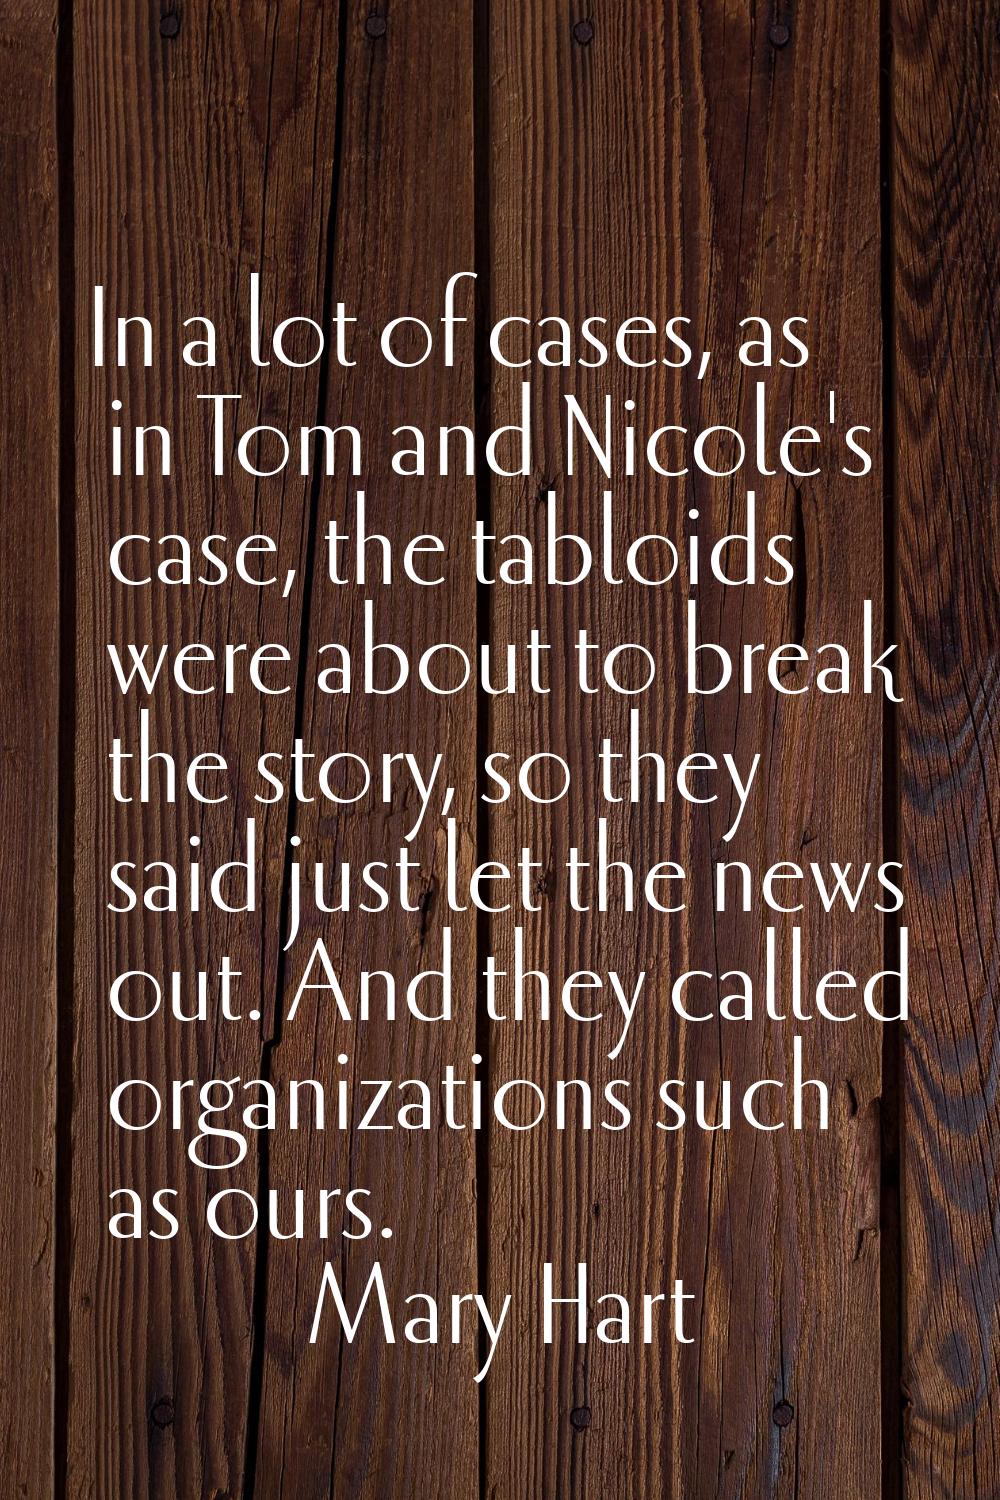 In a lot of cases, as in Tom and Nicole's case, the tabloids were about to break the story, so they